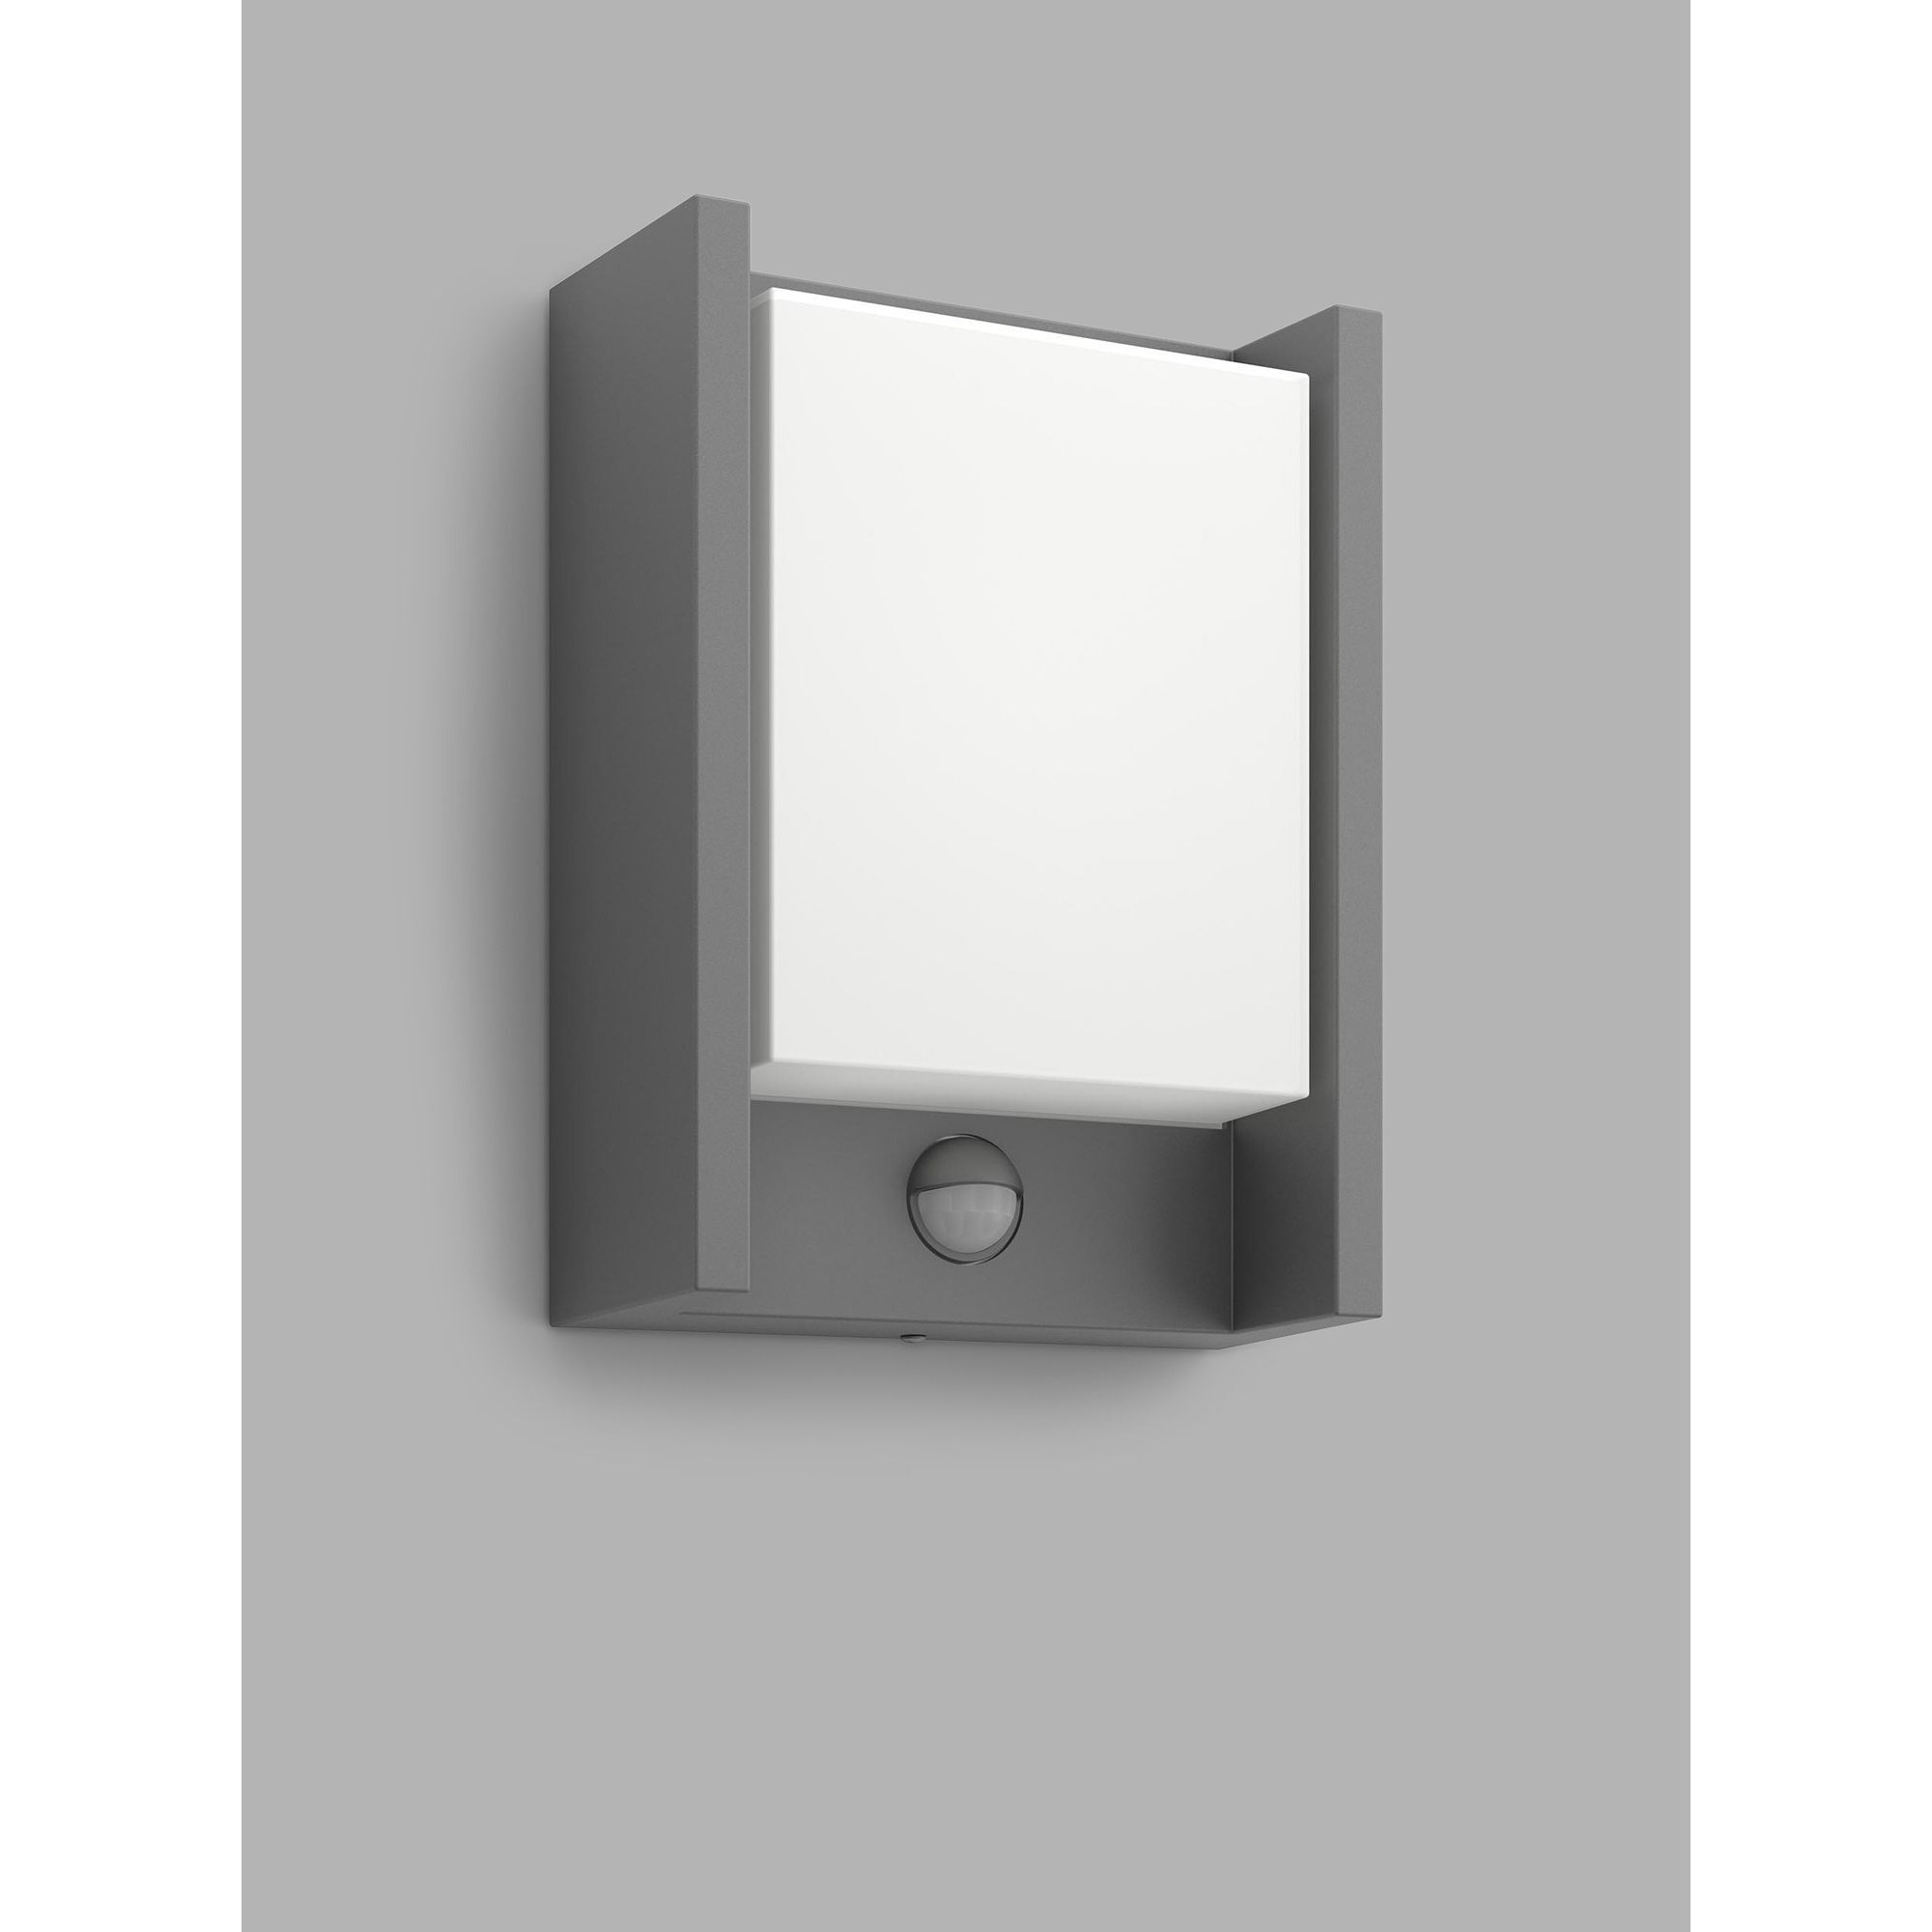 Philips Arbour LED PIR Motion Sensor Outdoor Wall Light, Anthracite - image 1